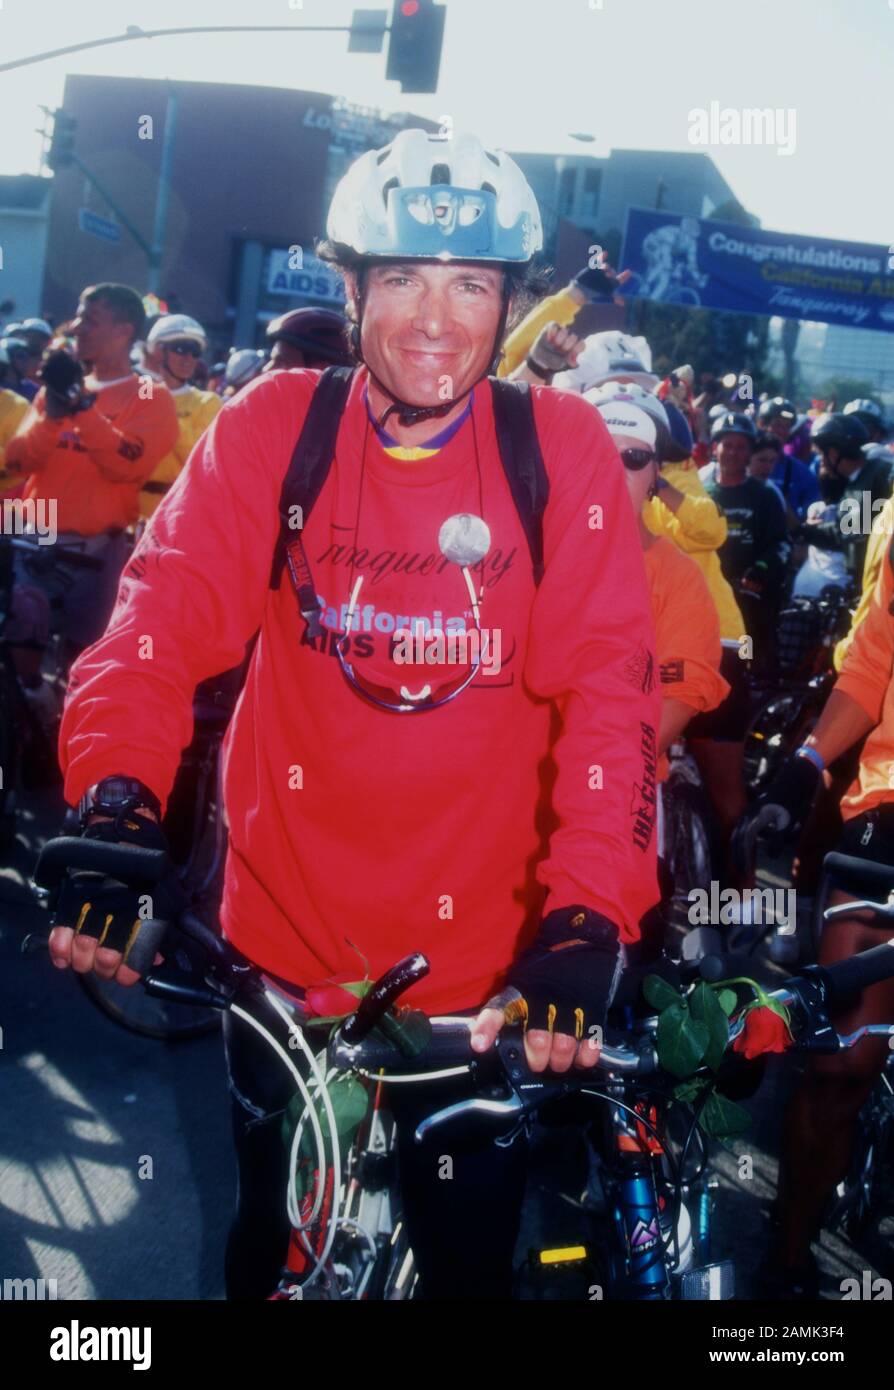 West Hollywood, California, USA 20th May 1995 Actor Robert Desiderio attends California Aids Ride on May 20, 1995 in West Hollywood, California, USA. Photo by Barry King/Alamy Stock Photo Stock Photo